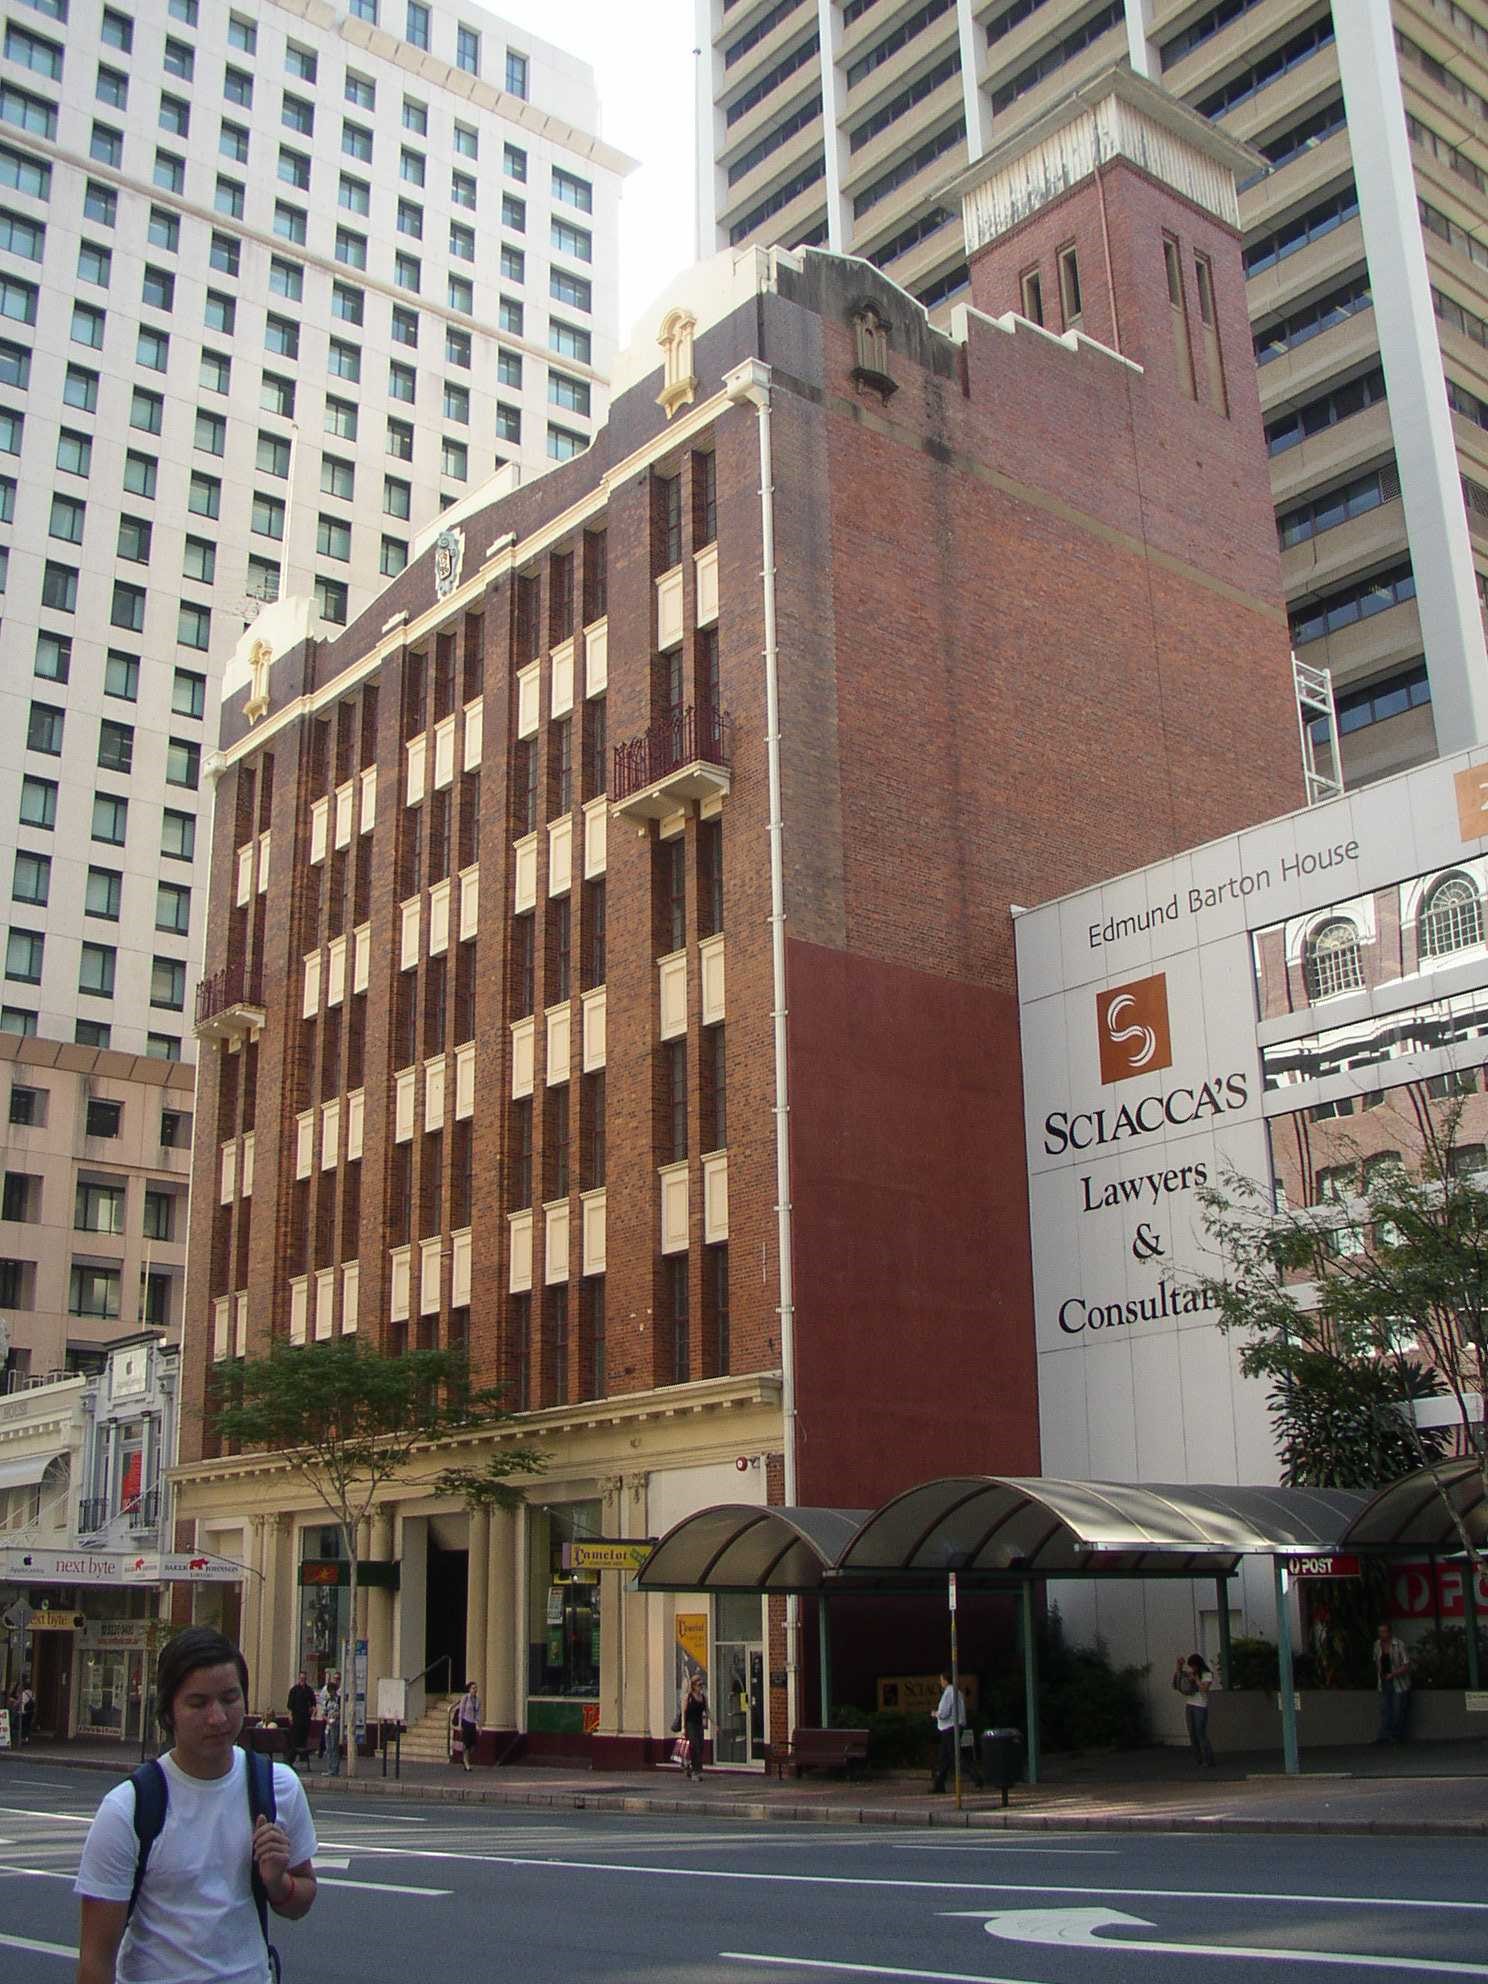 This is an image of the heritage place known as Gordon & Gotch Building (former)